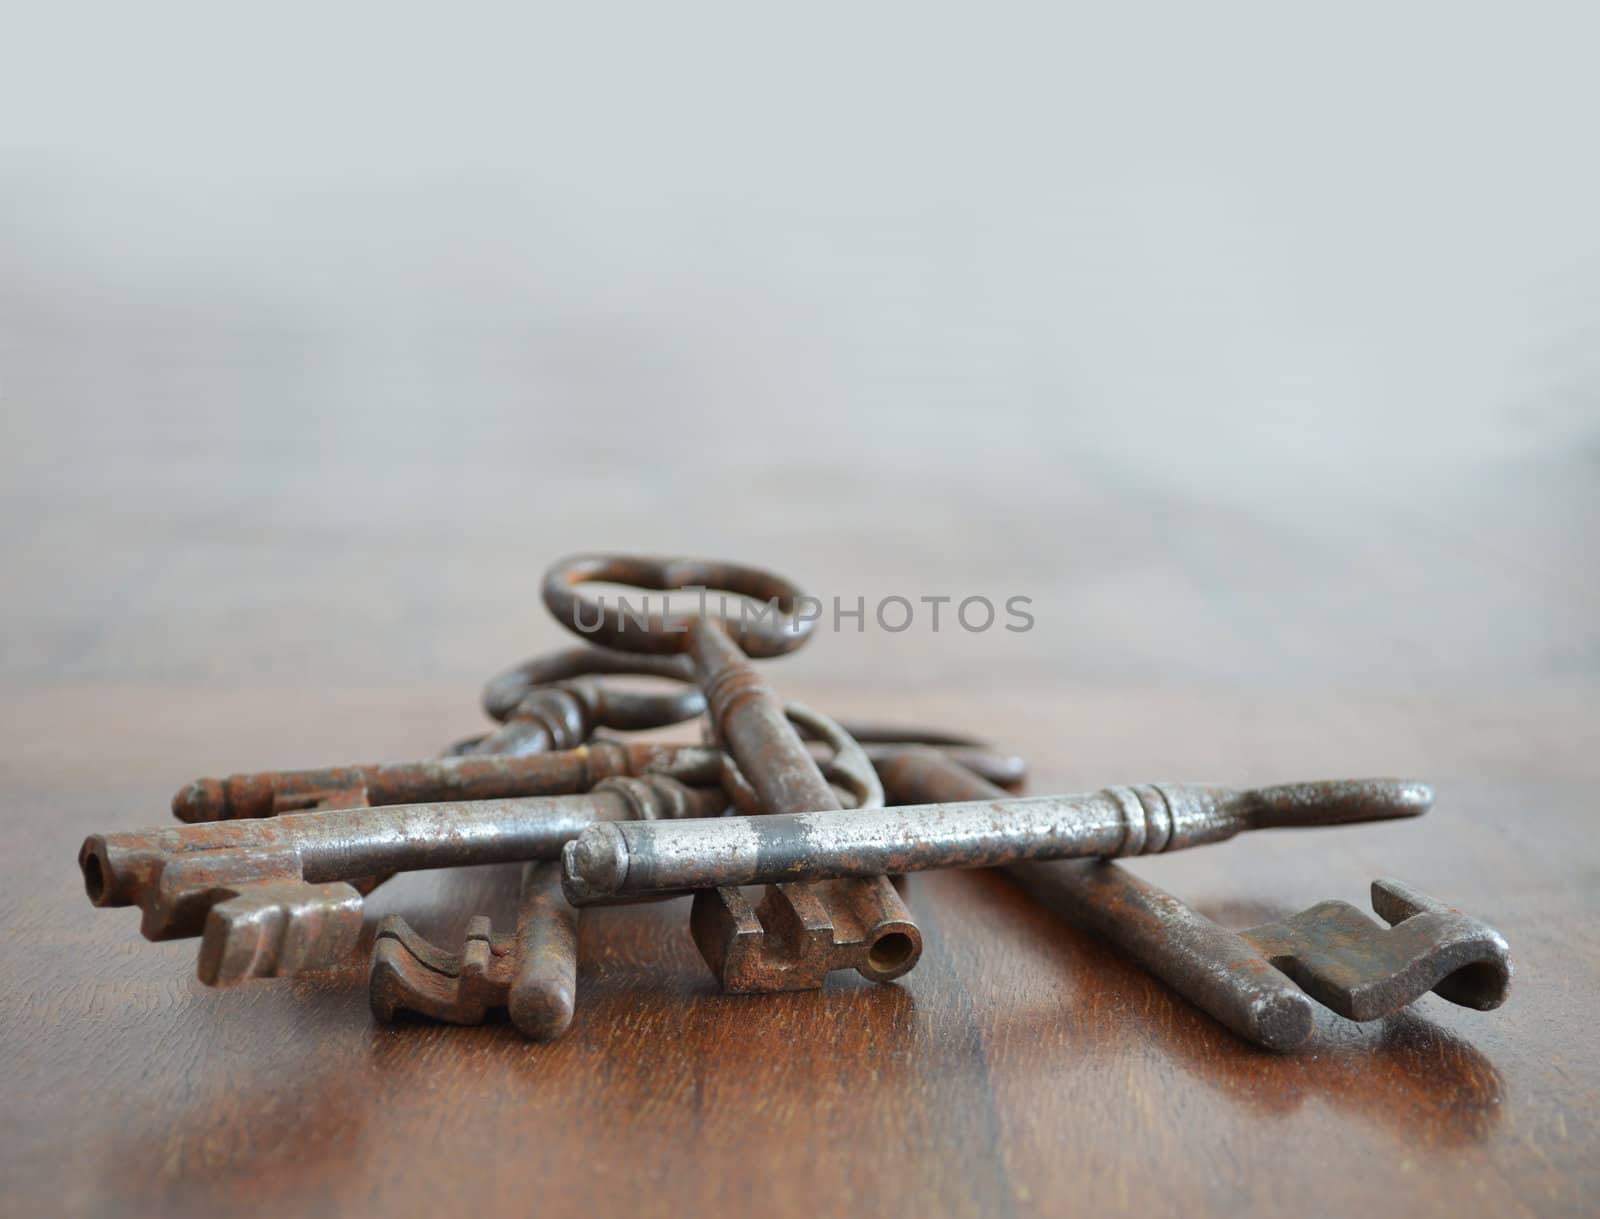 Bunch of old keys by artofphoto